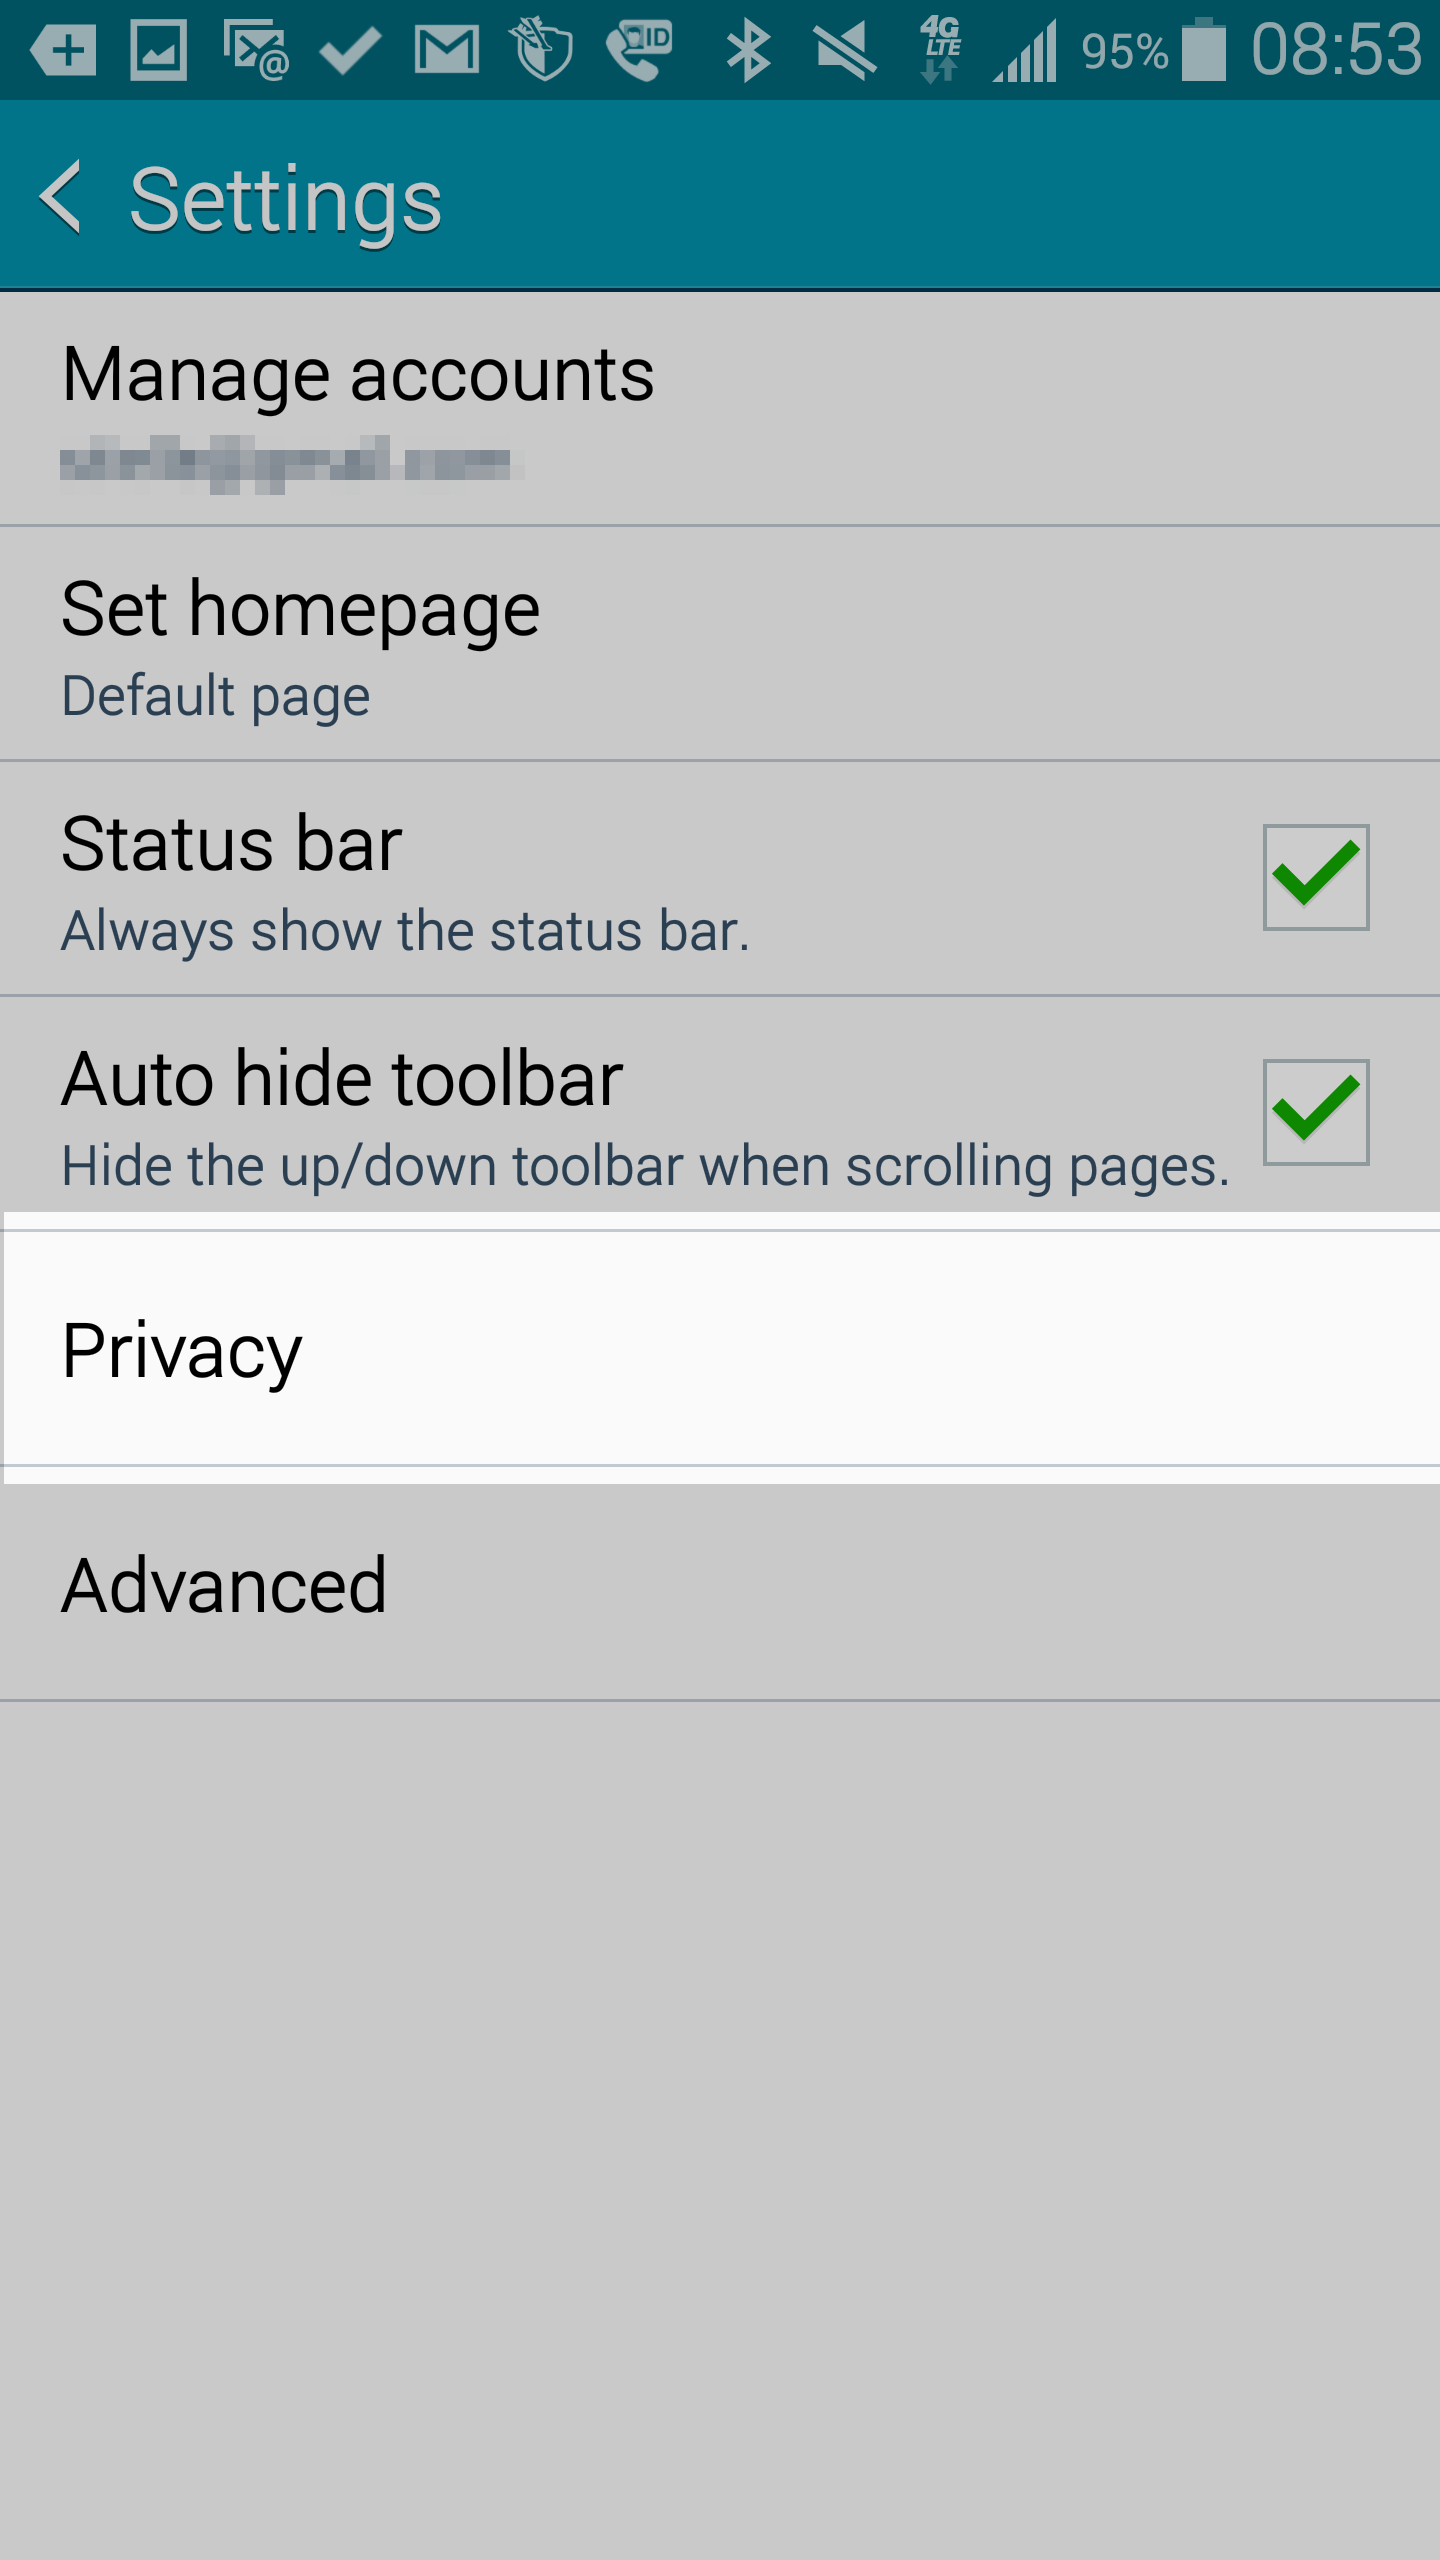 Tap on the Privacy option